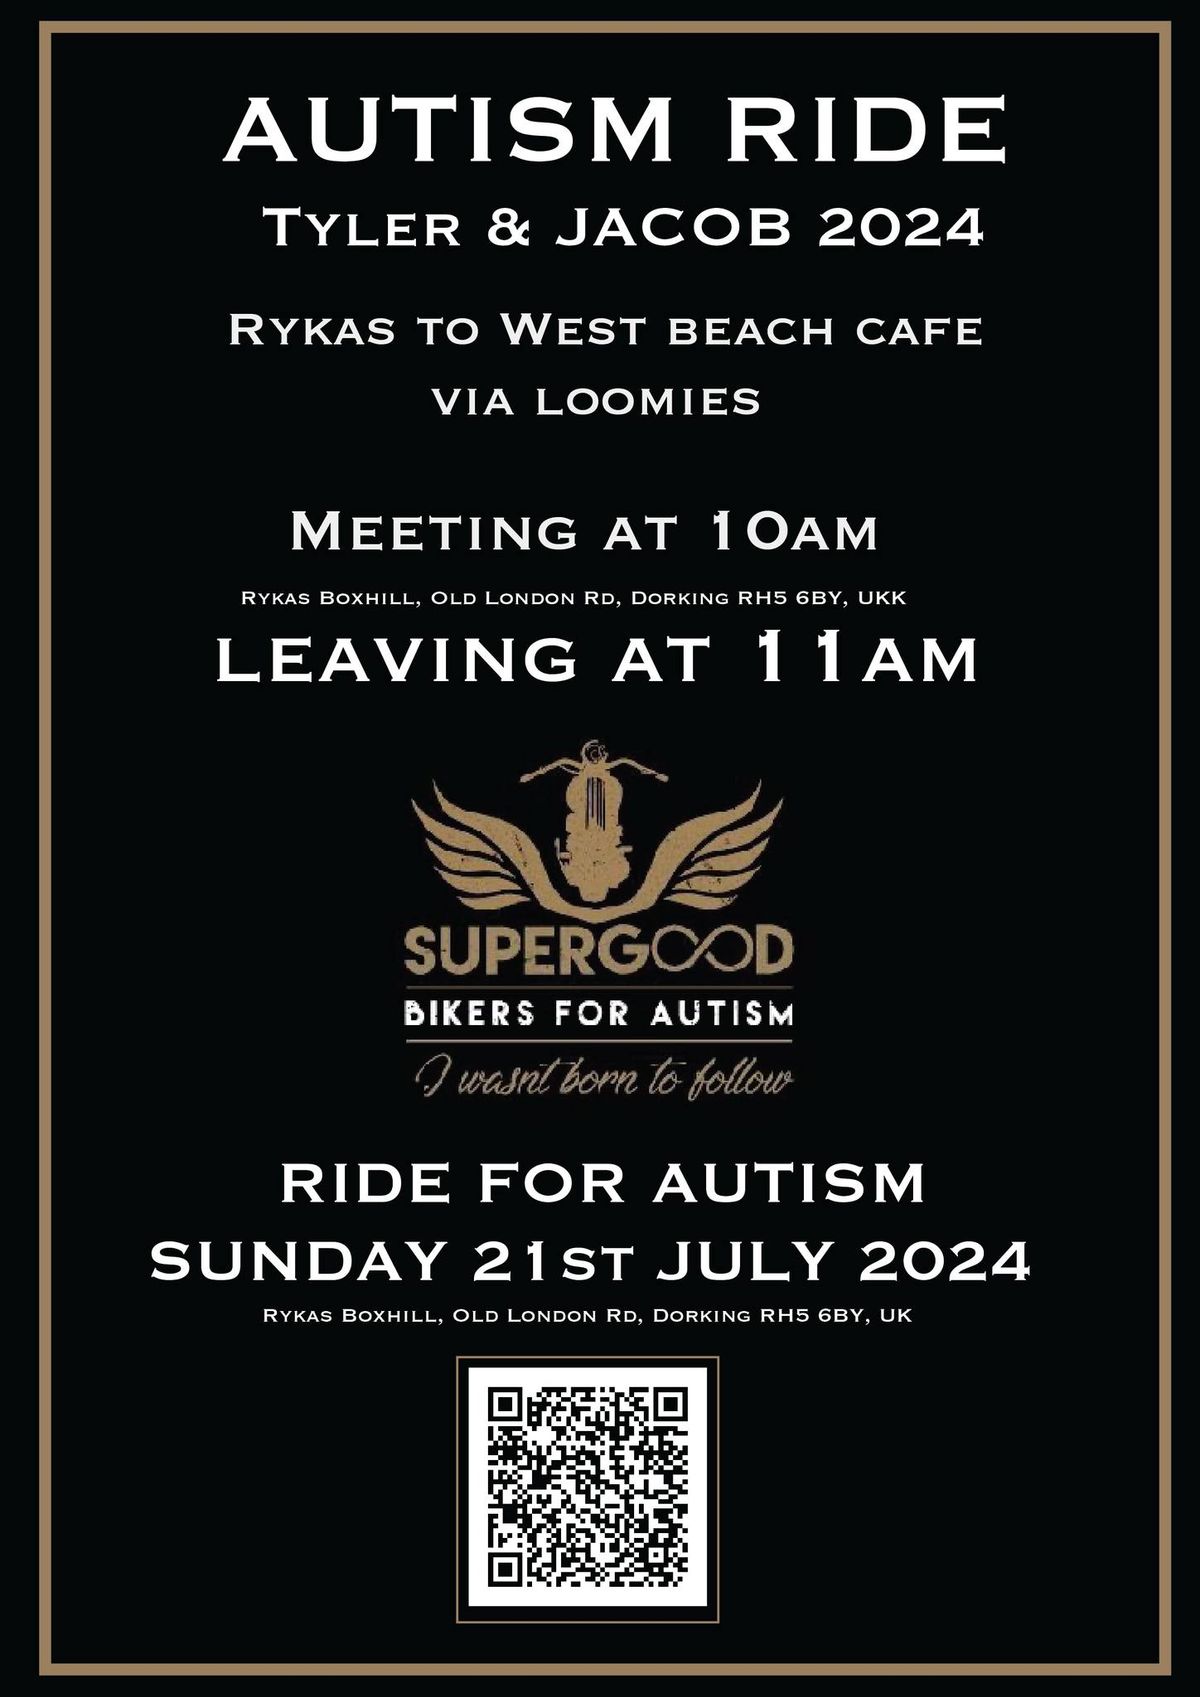 SGBFA CAFE RUN FOR TYLER & JACOB - date for diary